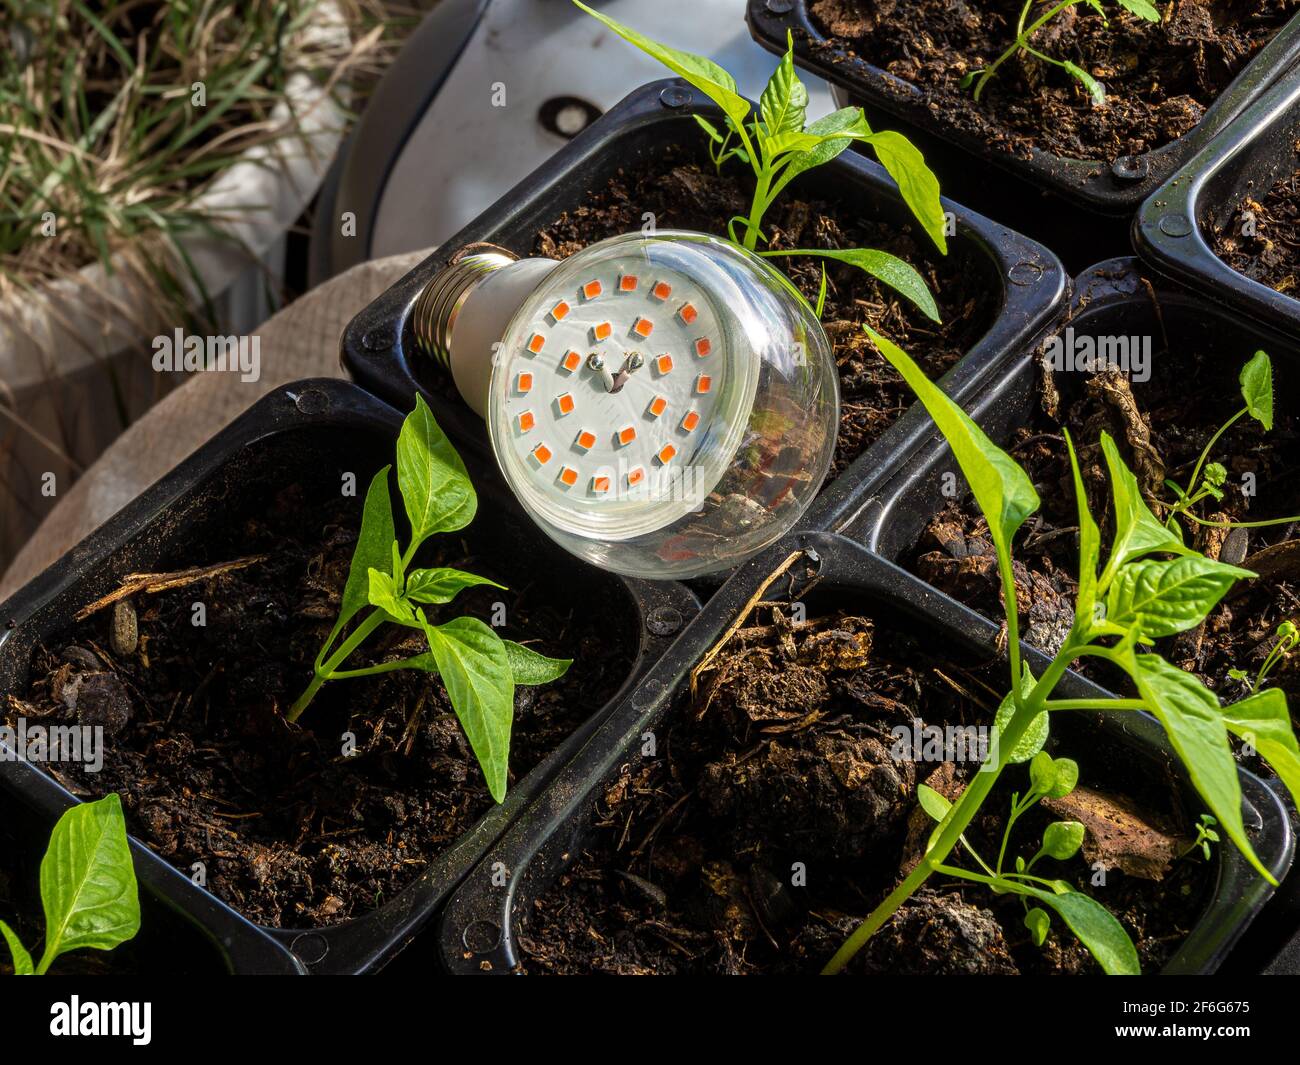 LED lamp for artificial lighting of indoor plants in short daylight conditions lies on pots with seedlings of nightshade crops Stock Photo